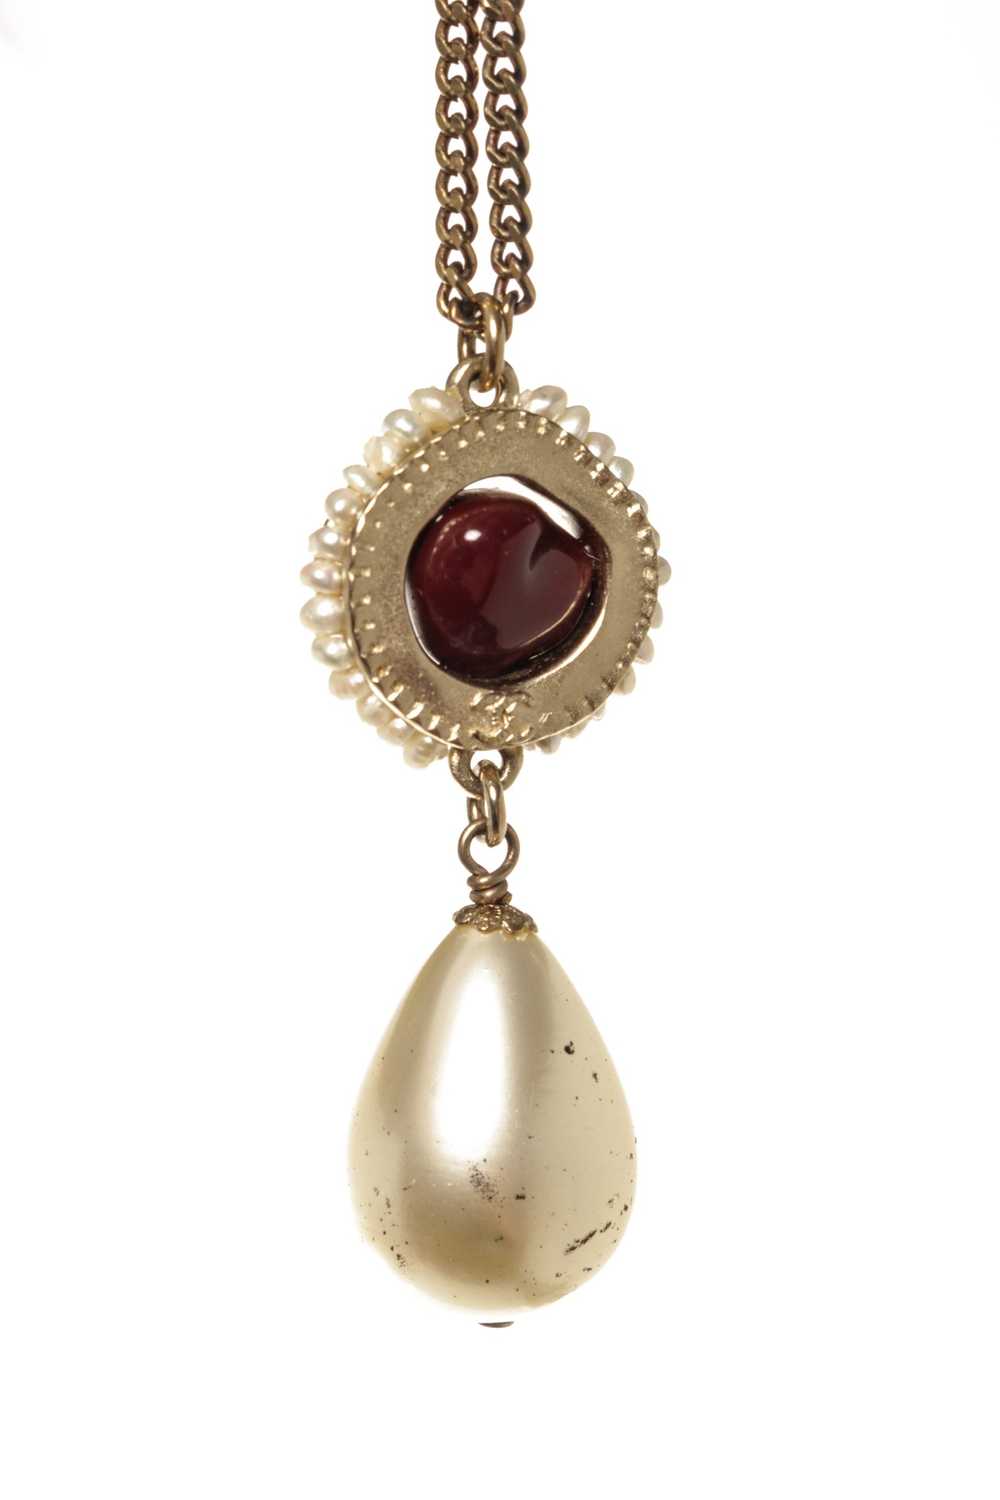 Chanel Chanel Red Stone Teardrop Pearl Necklace - image 4